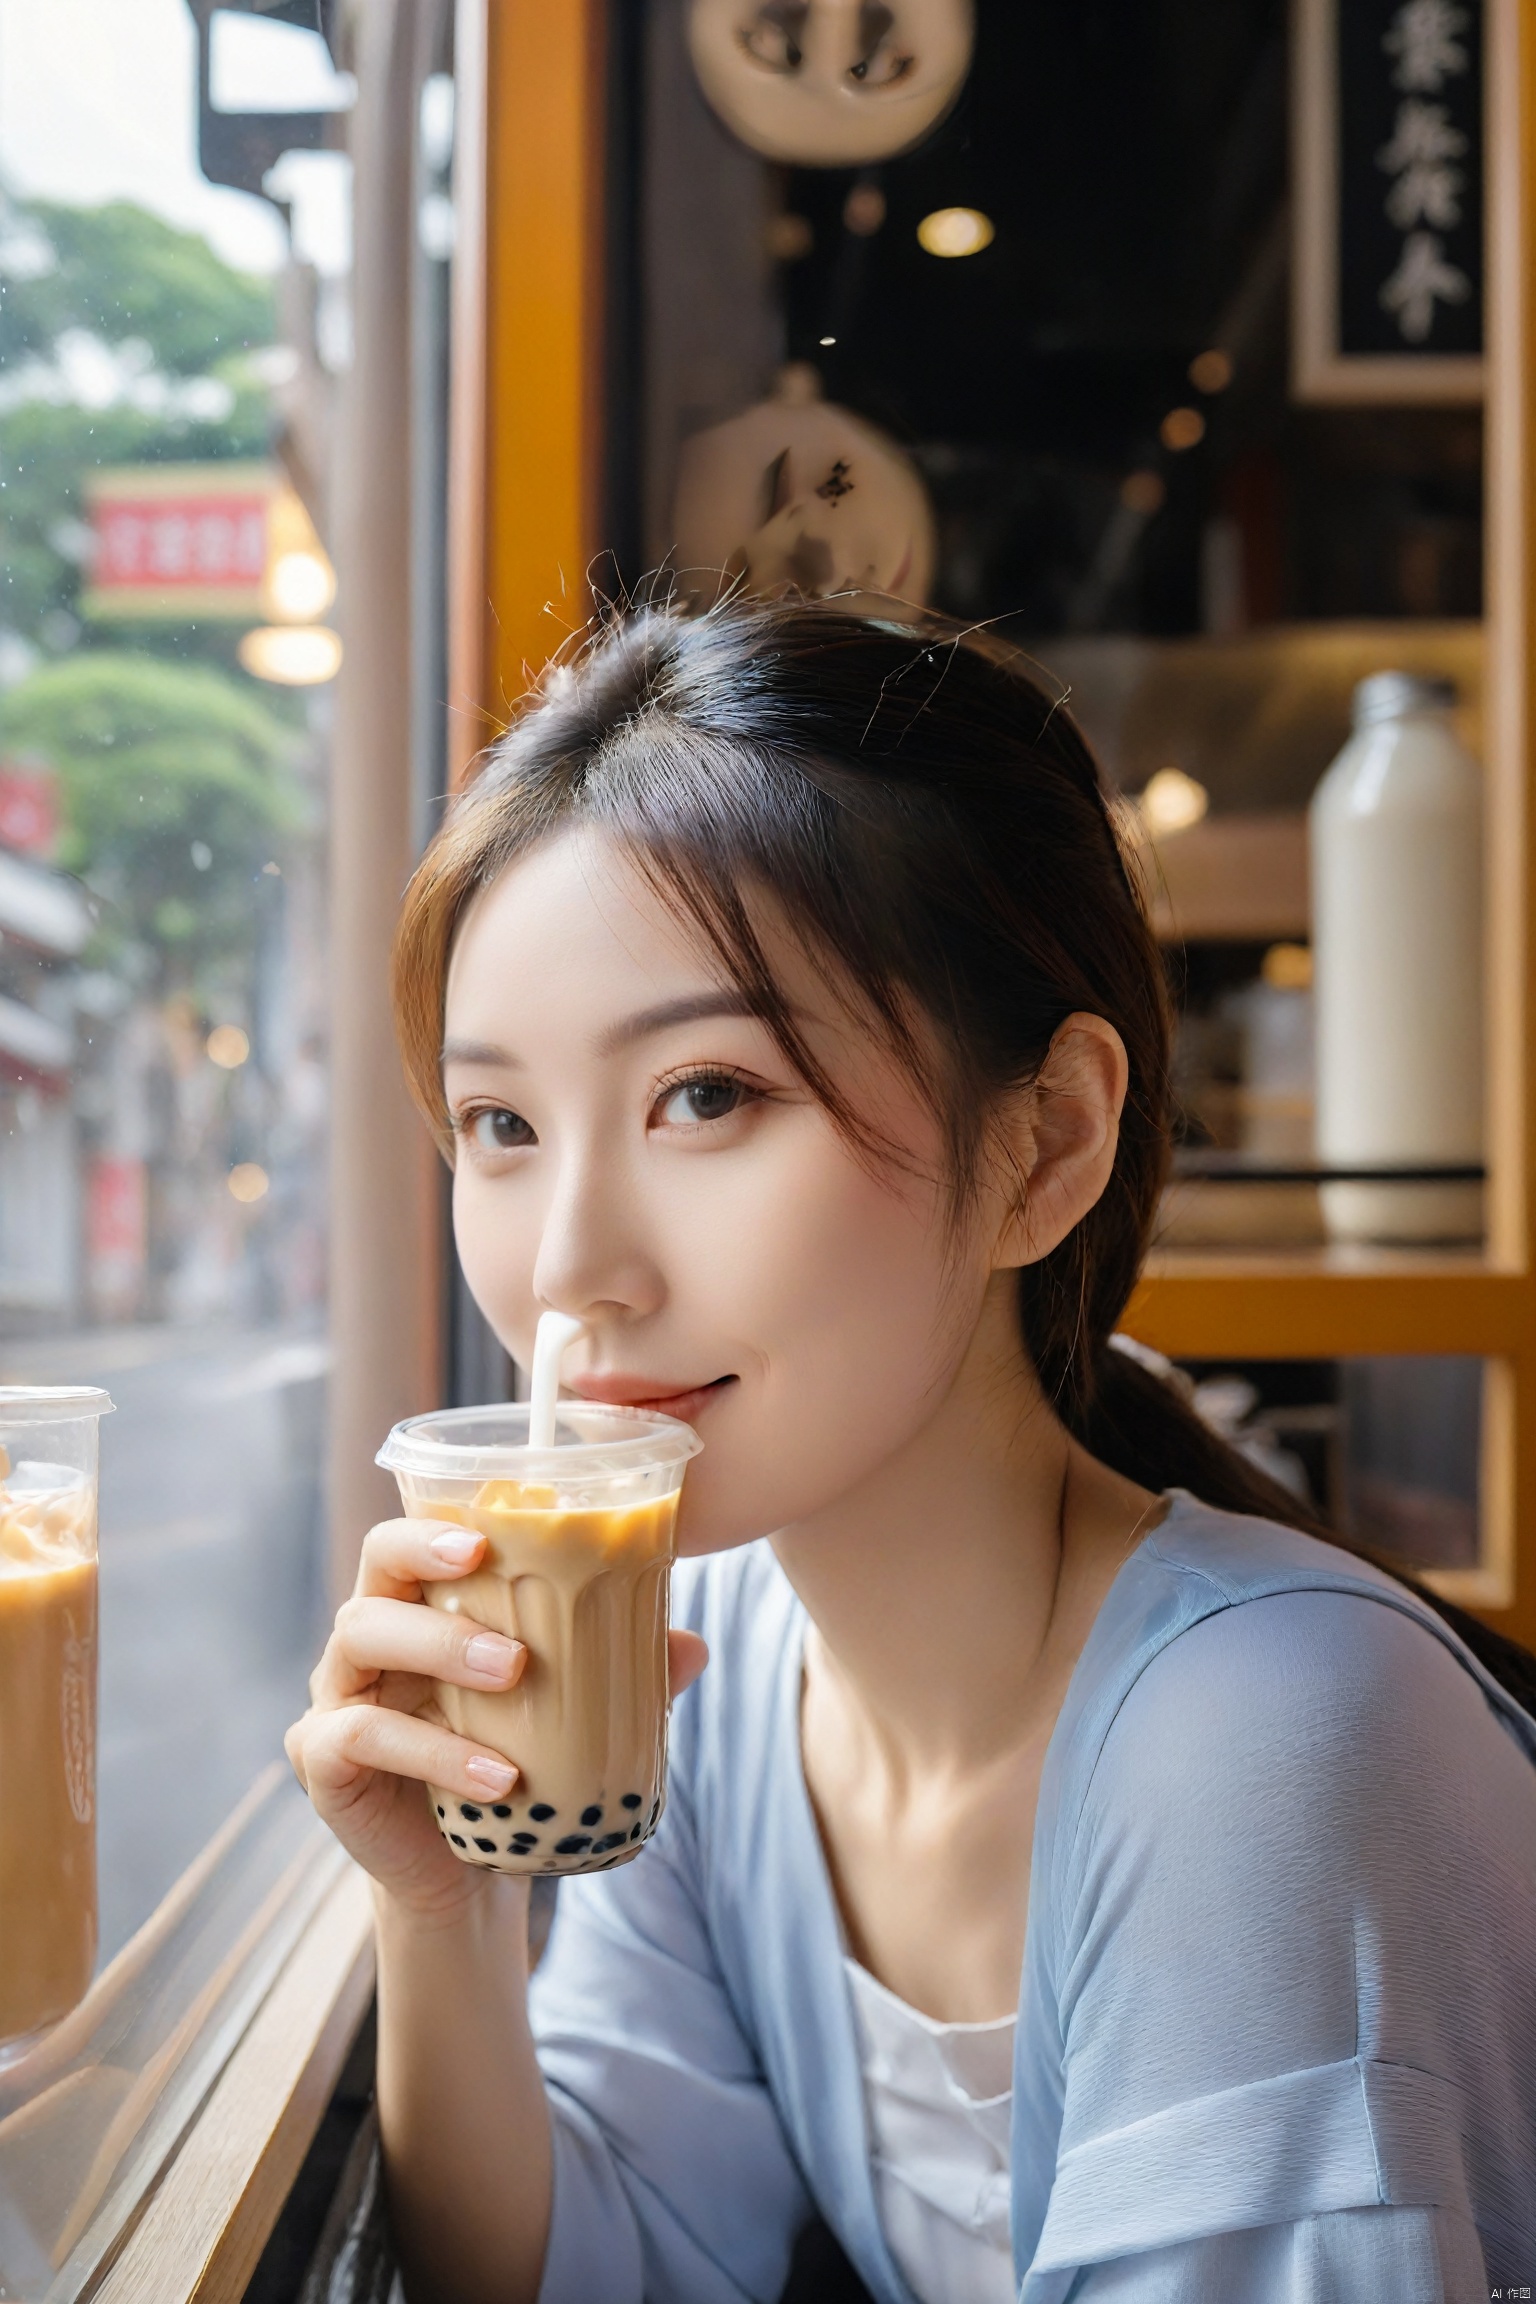  A young woman in her early twenties sits in a modern milk tea shop, holding a steaming cup of milk tea in her hands. Her eyes show a hint of contentment as she occasionally glances out the window, where the street scene creates a dynamic canvas on the glass. The soft lighting inside the shop mingles with the aroma of the milk tea, creating a relaxed and joyful atmosphere. She gently blows on the milk tea, sipping it with care, as if savoring a small but certain happiness of her own.